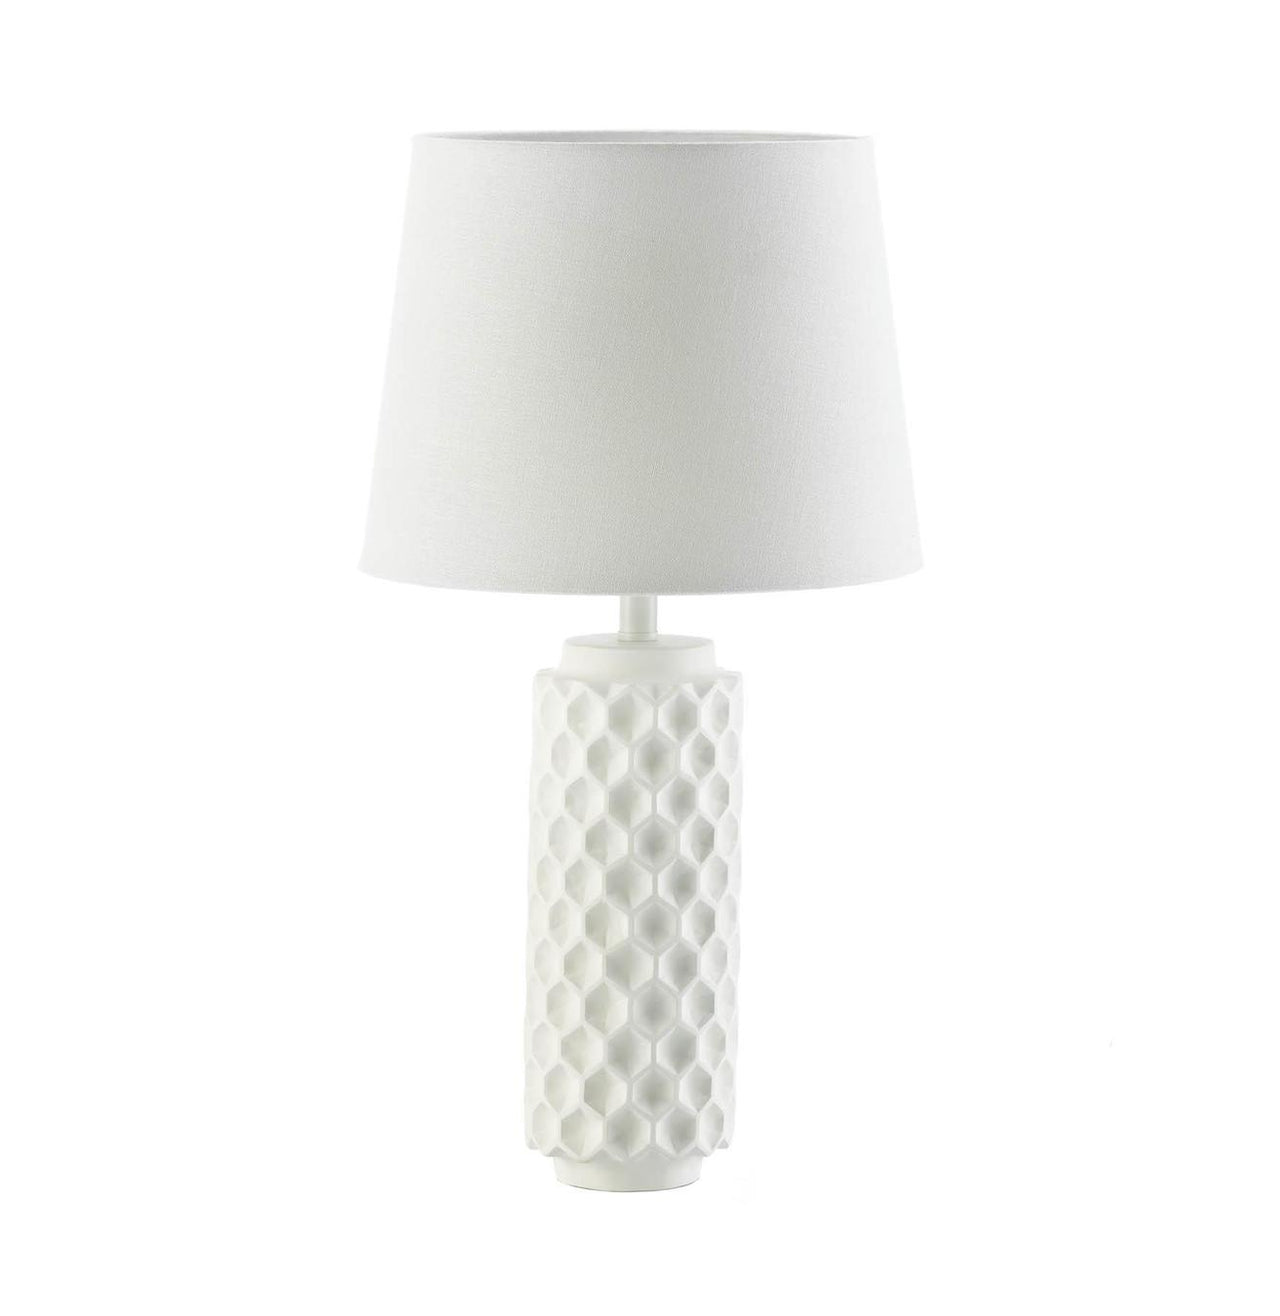 White Honeycomb Table Lamp Gallery of Light 